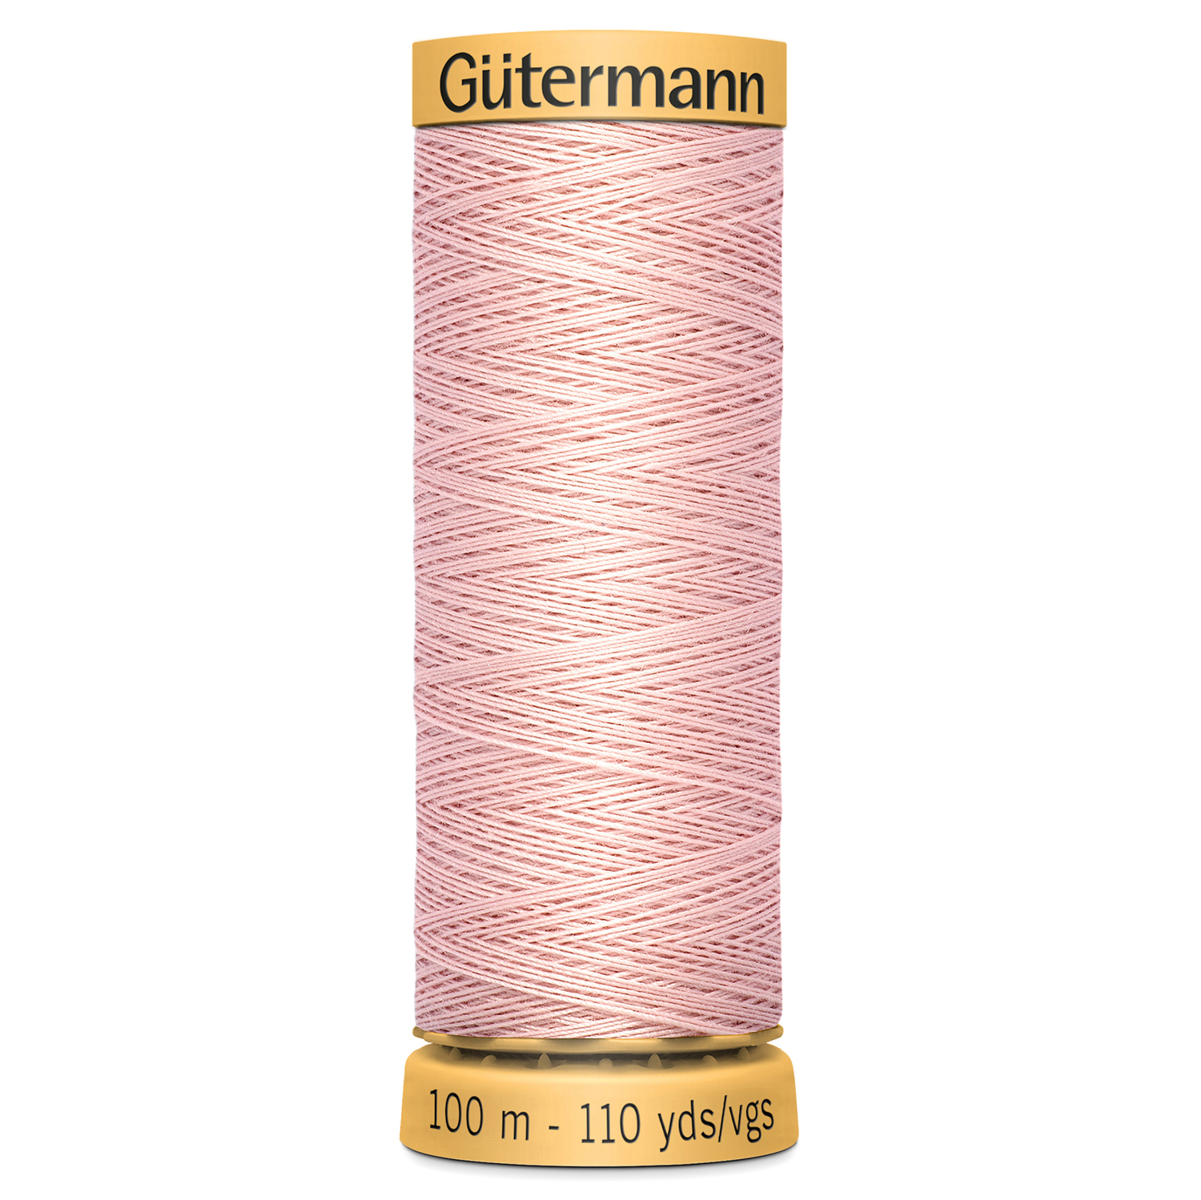 Gutermann Natural Cotton - 2628 from Jaycotts Sewing Supplies